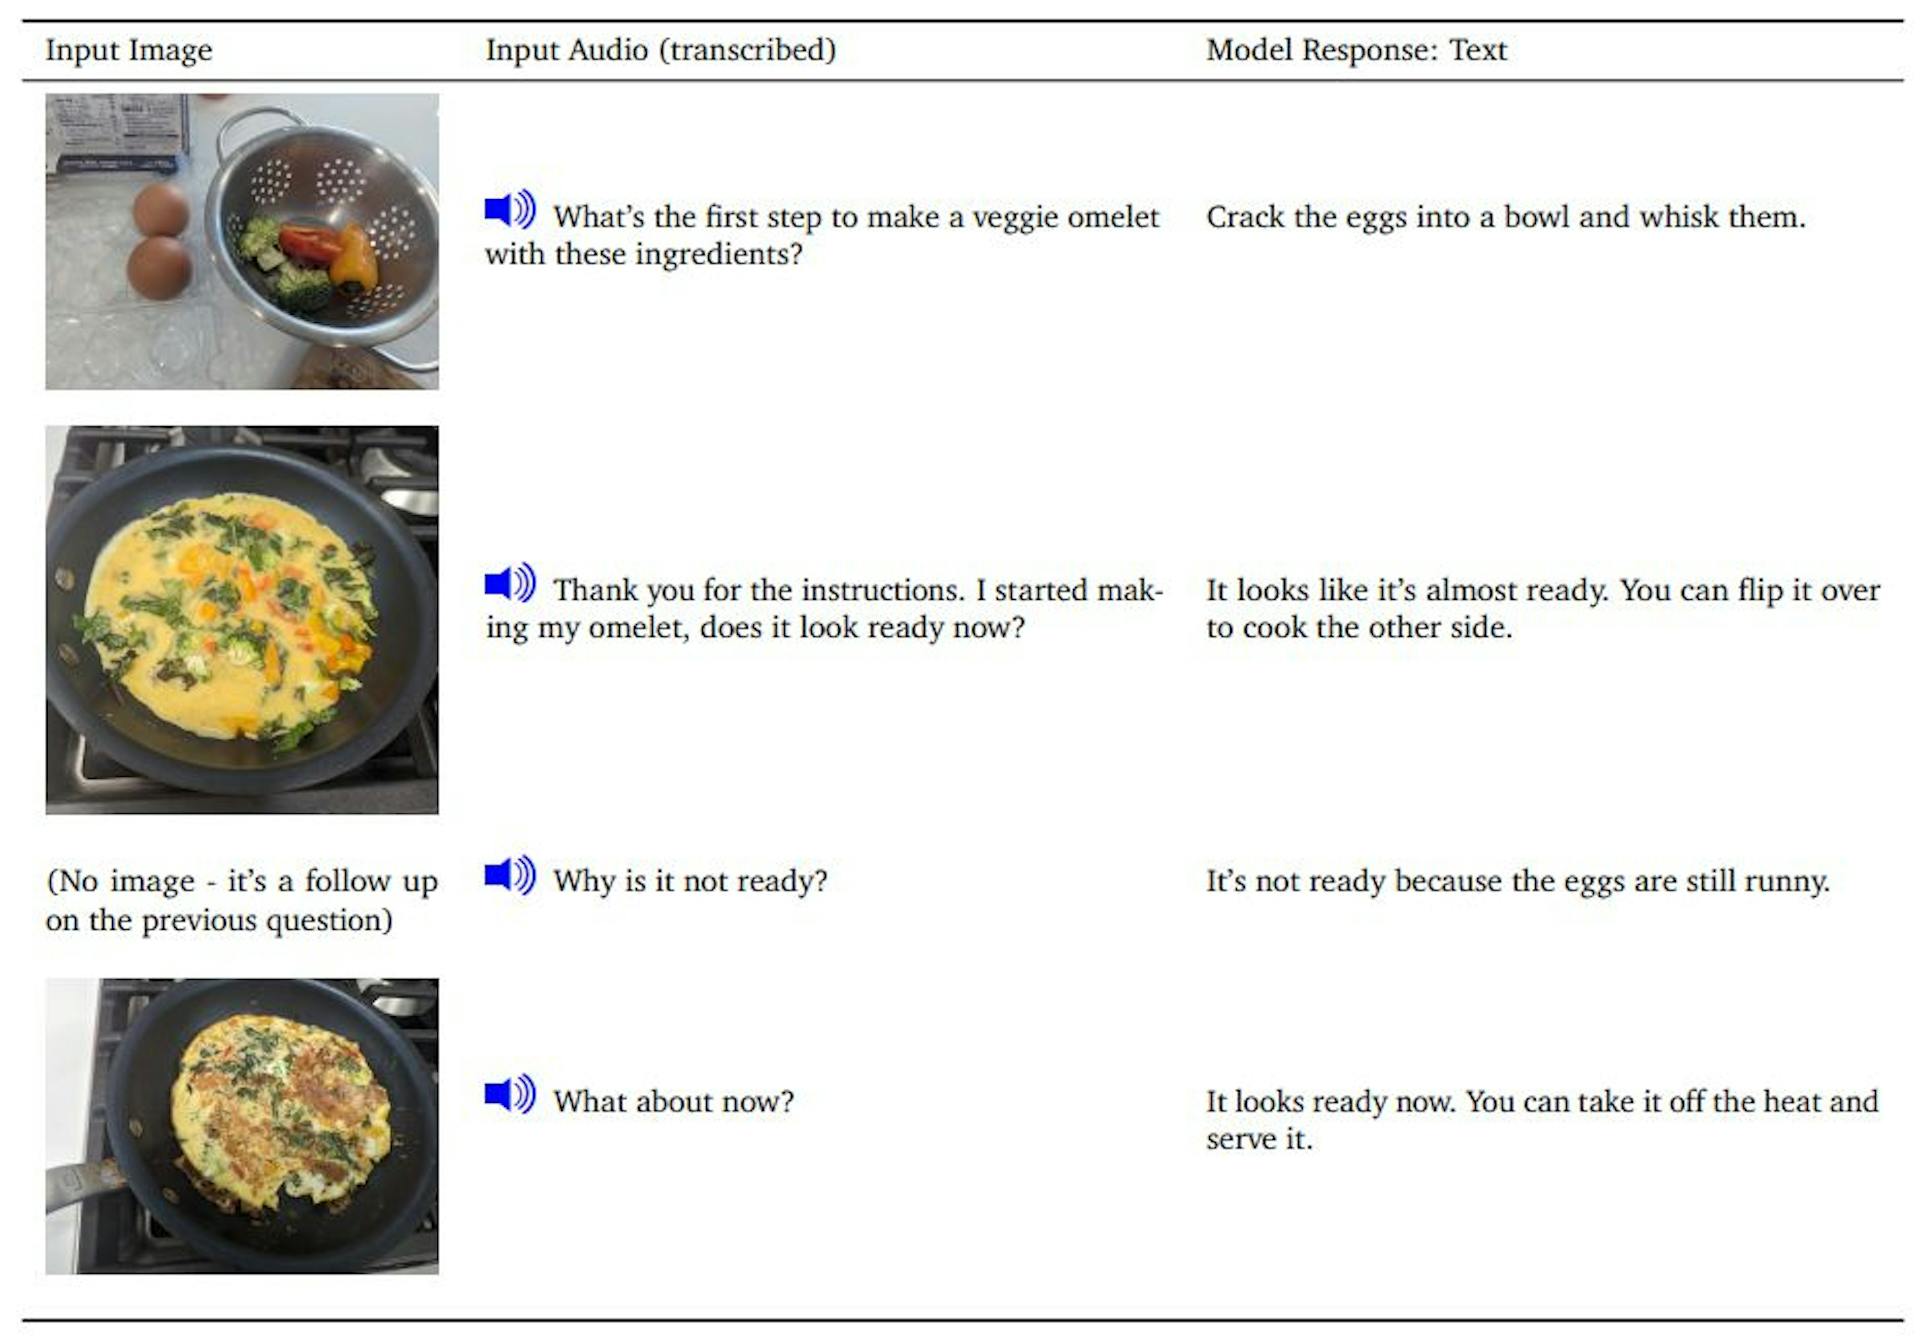 Table 13 | Audio-visual qualitative example showcasing the ability of Gemini models to process interleaved sequences of text, vision, and audio, as well as reason across modalities. This example inputs interleaved images and audio from the user in a cooking scenario. The user prompts the model for instructions to make an omelet and to inspect whether it is fully cooked.